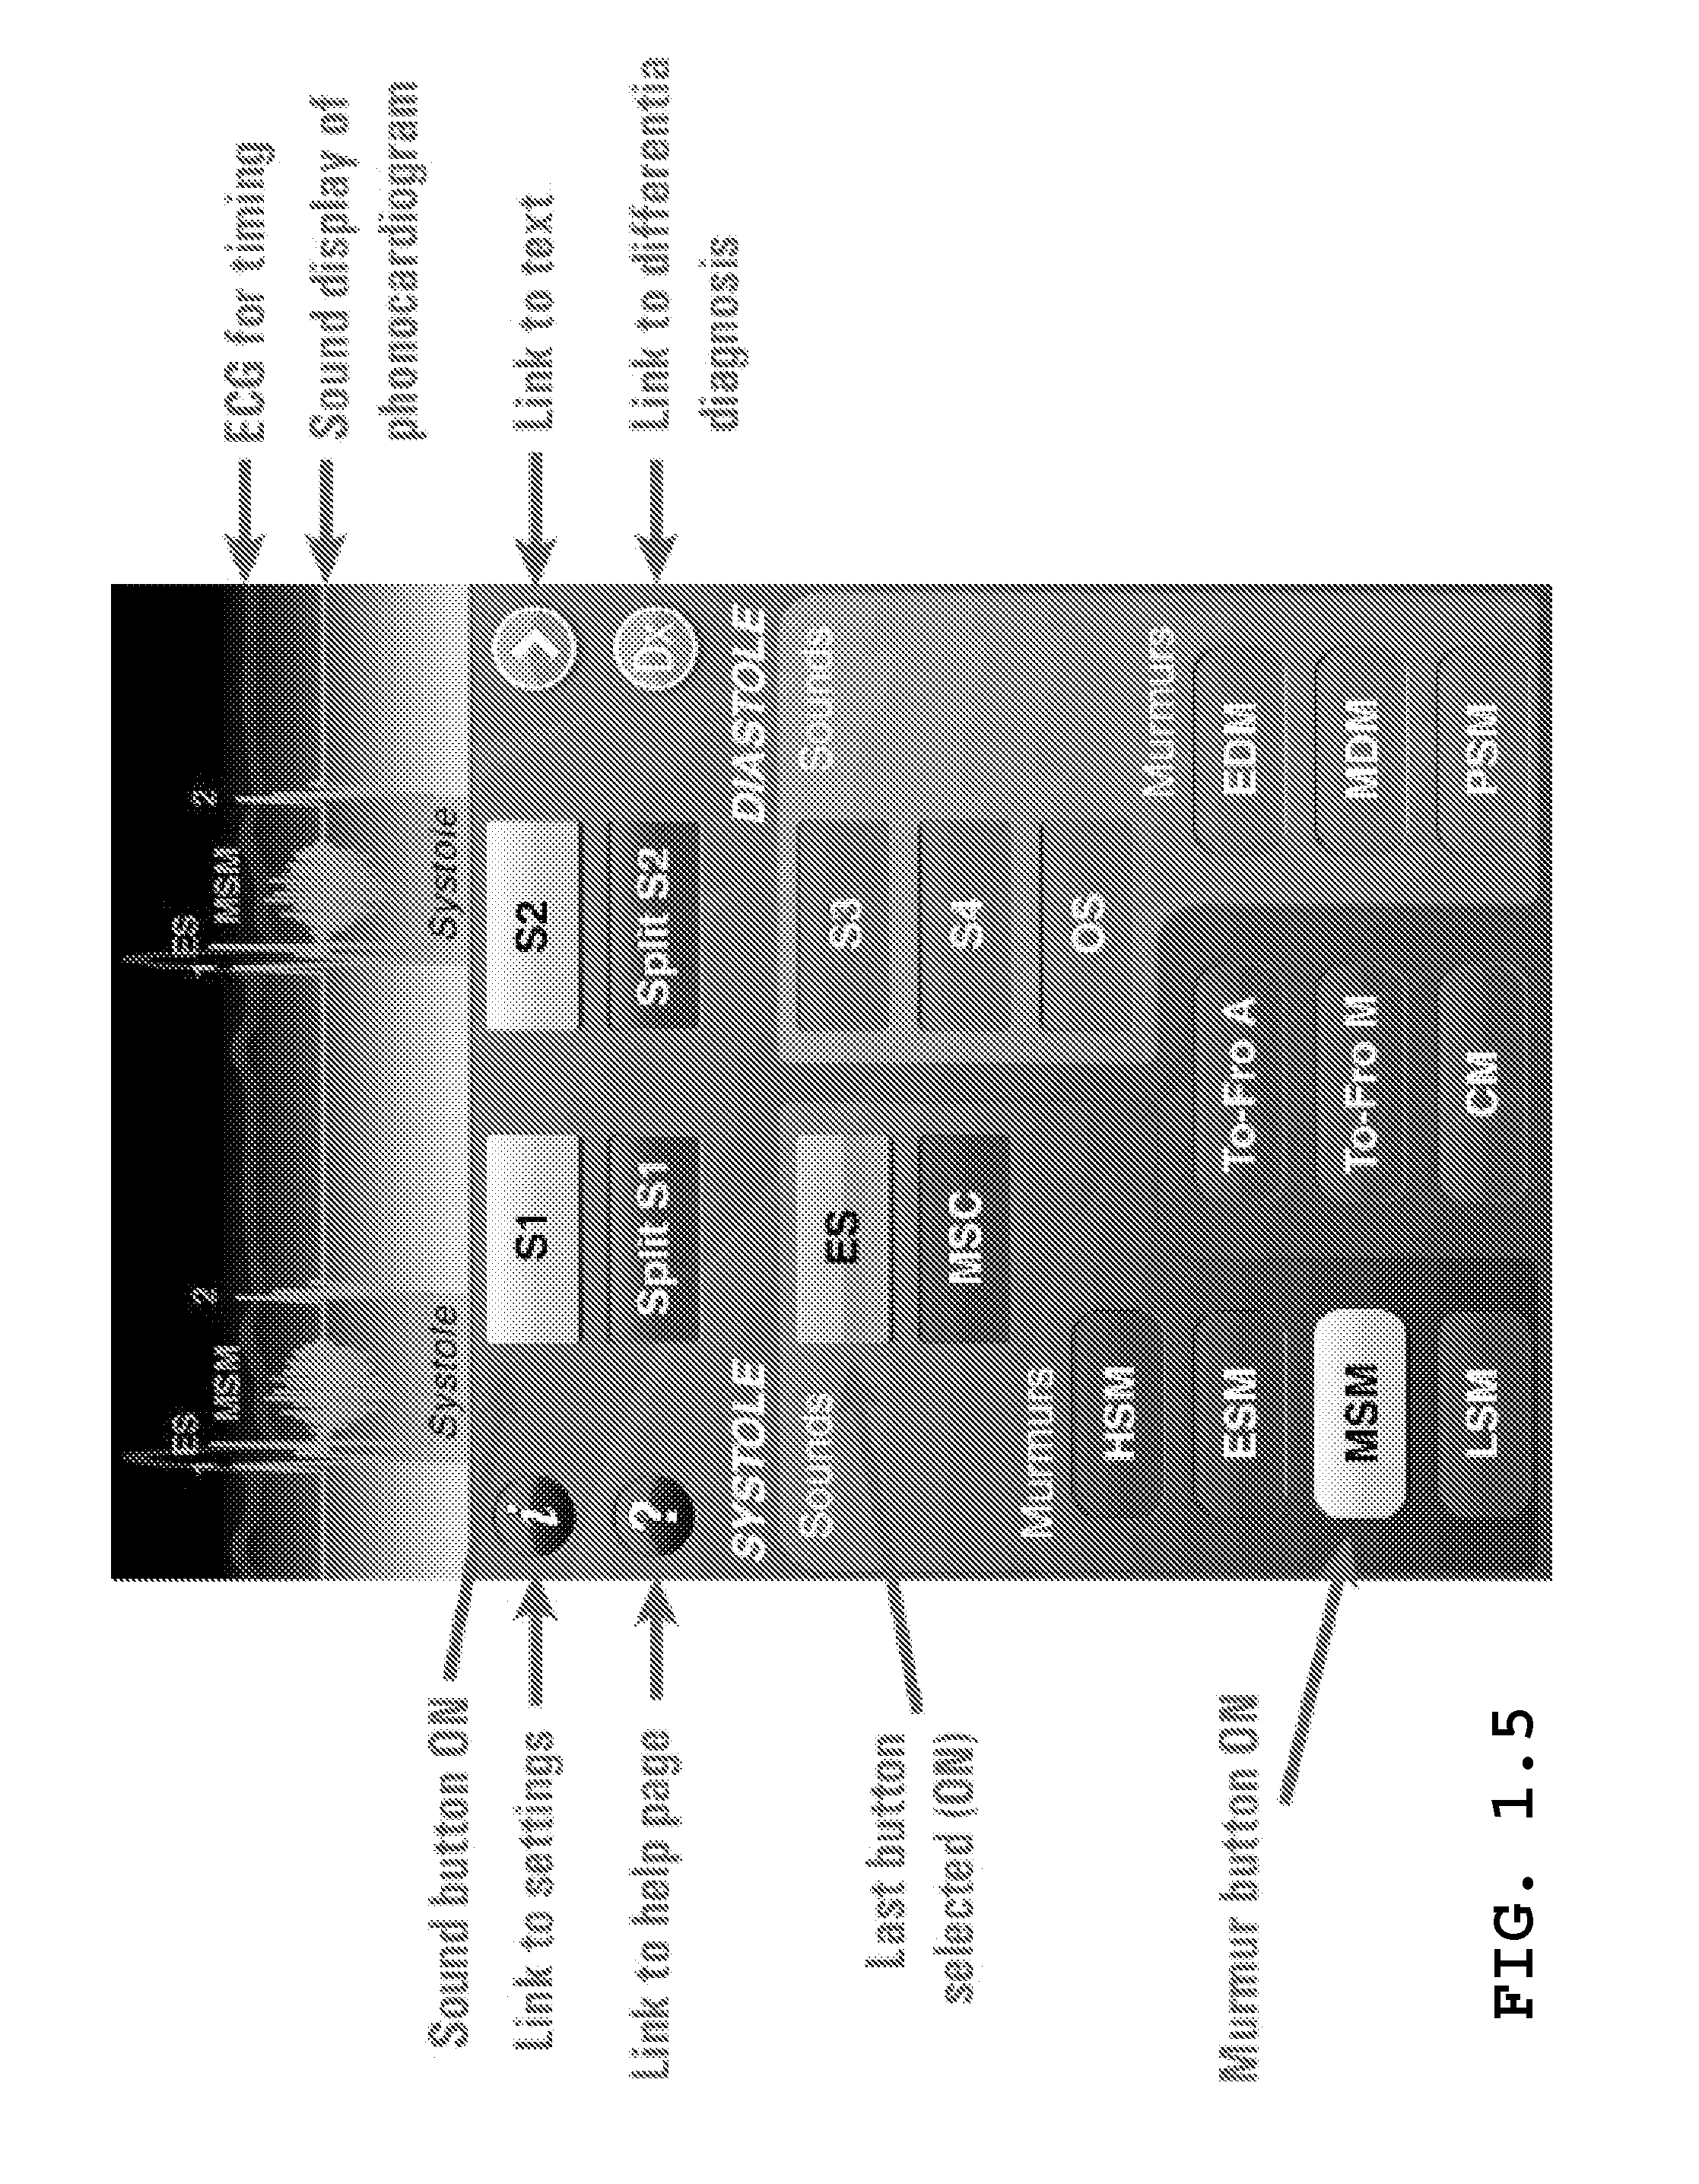 Method and system for identifying cardiopulmonary findings by using a heart and lung sounds builder